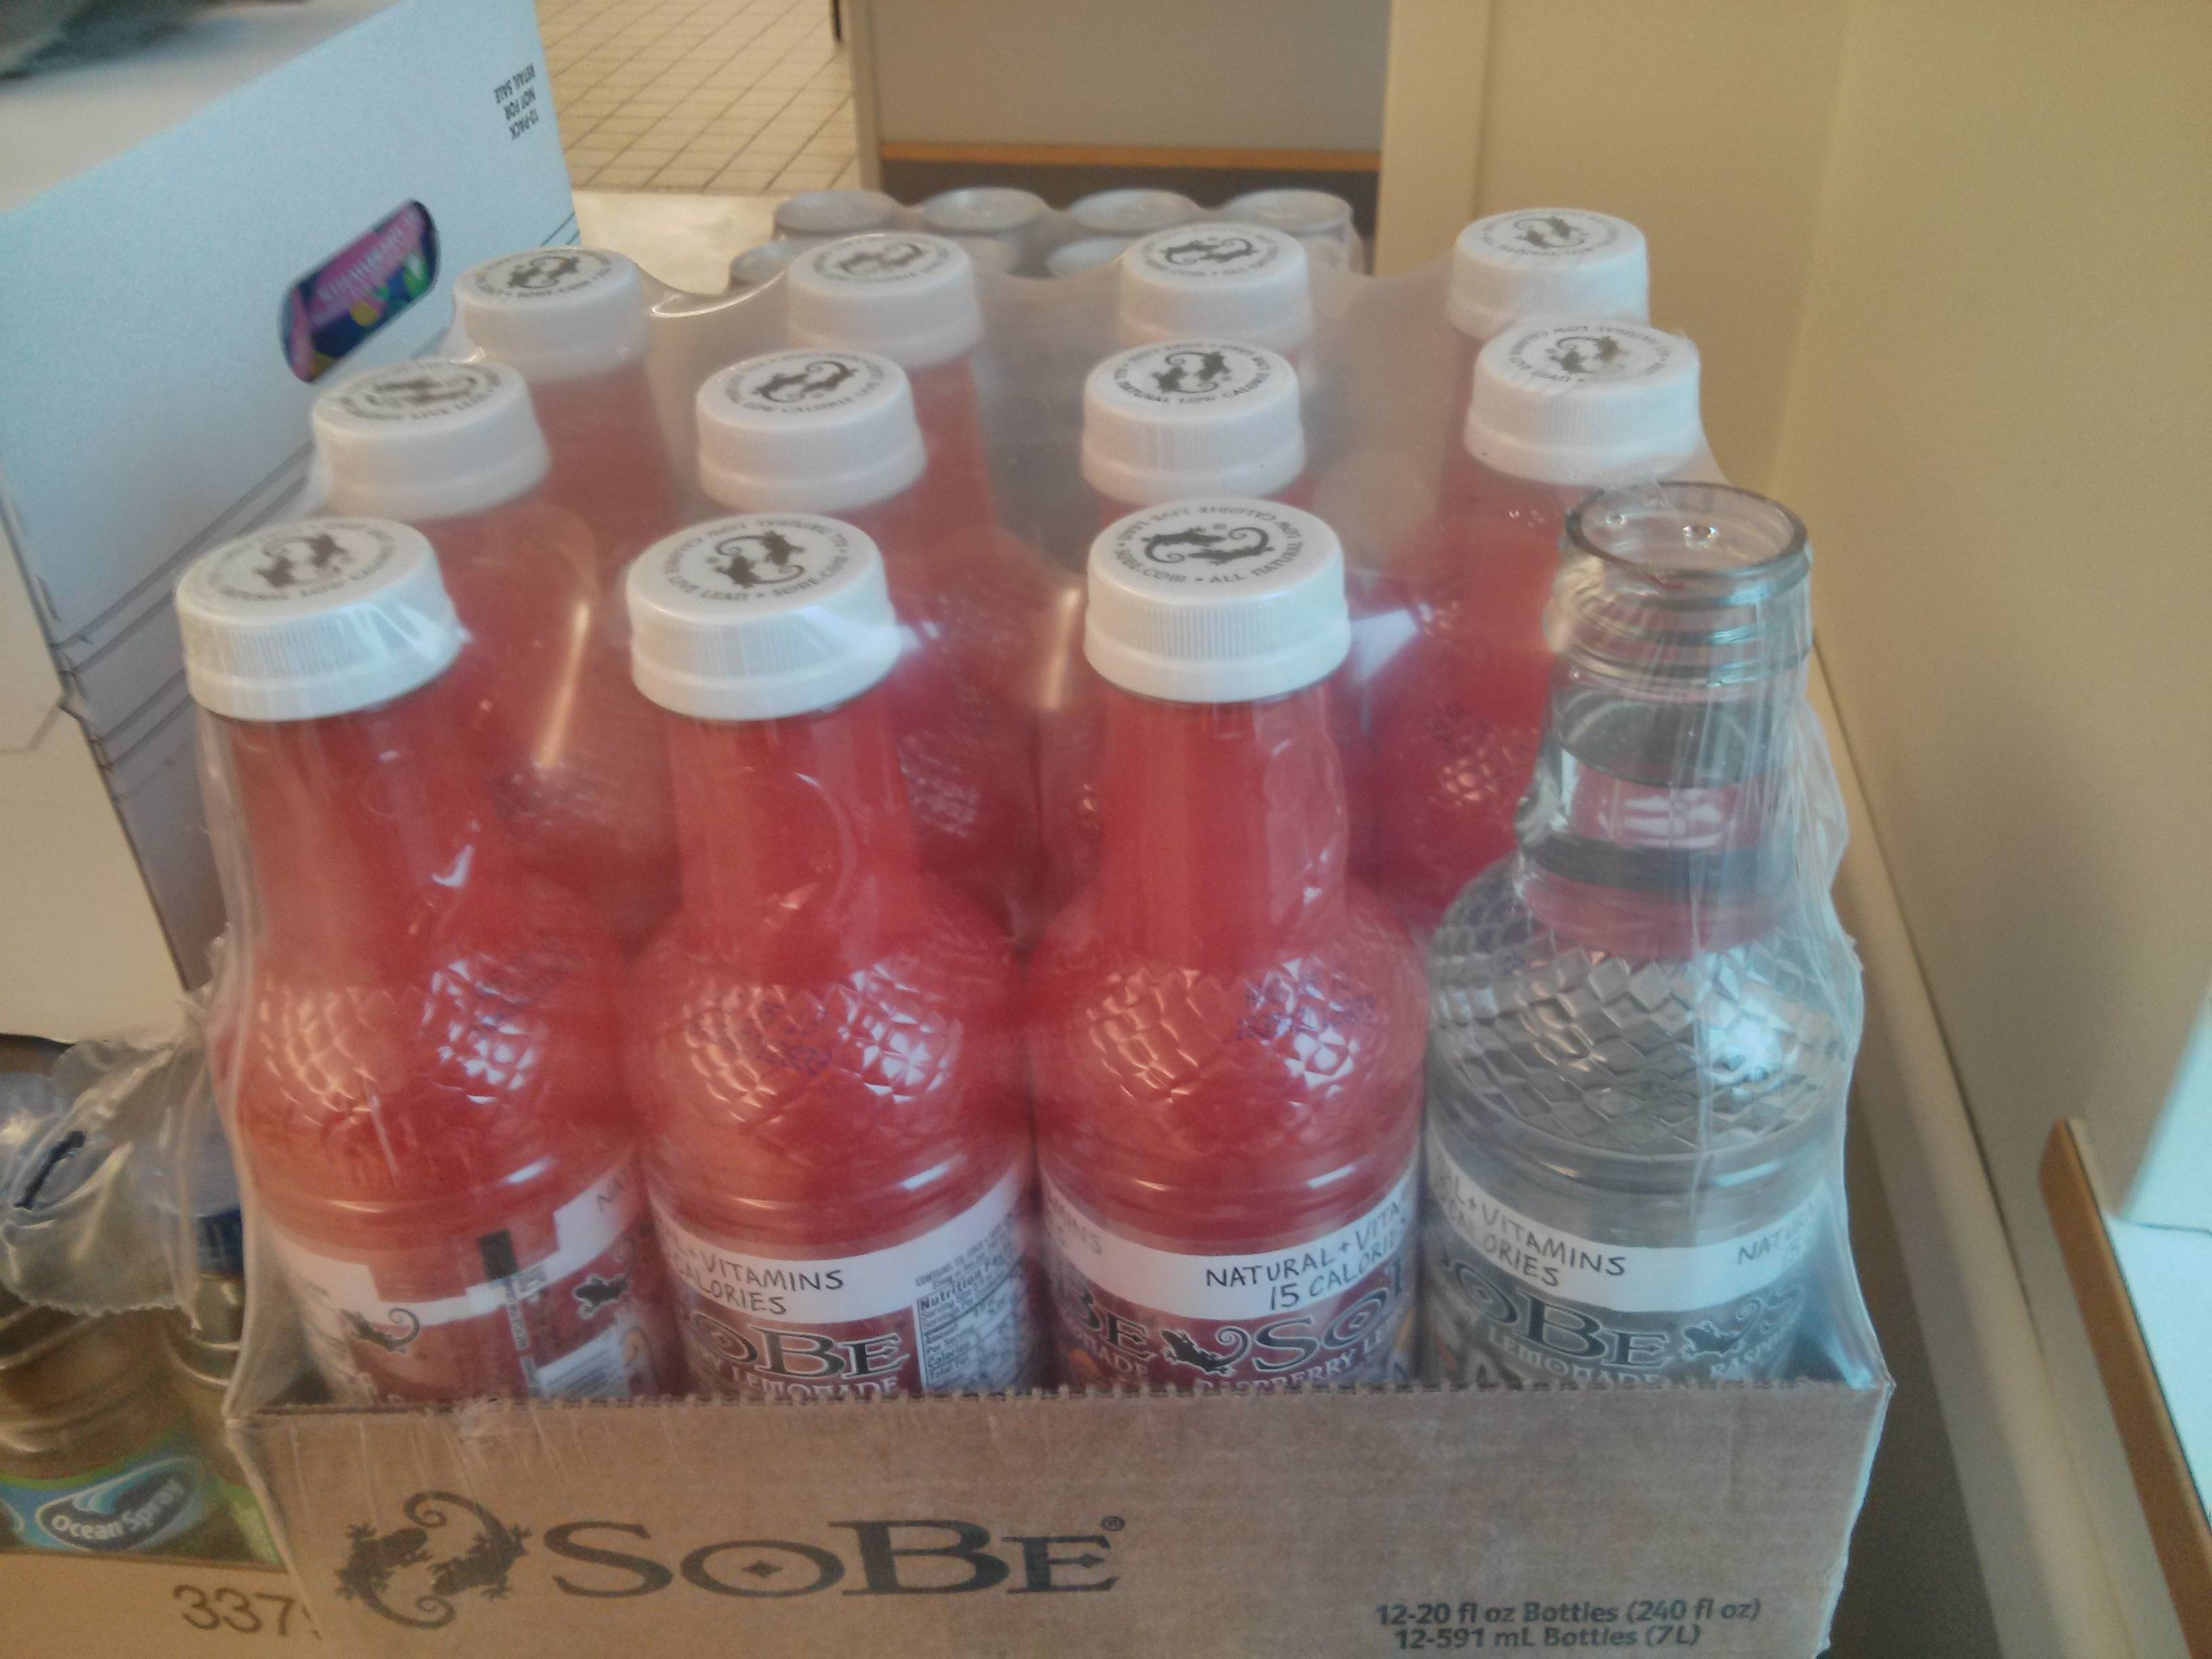 One sobe was shrink wrapped with no cap but filled with clear 

liquid.